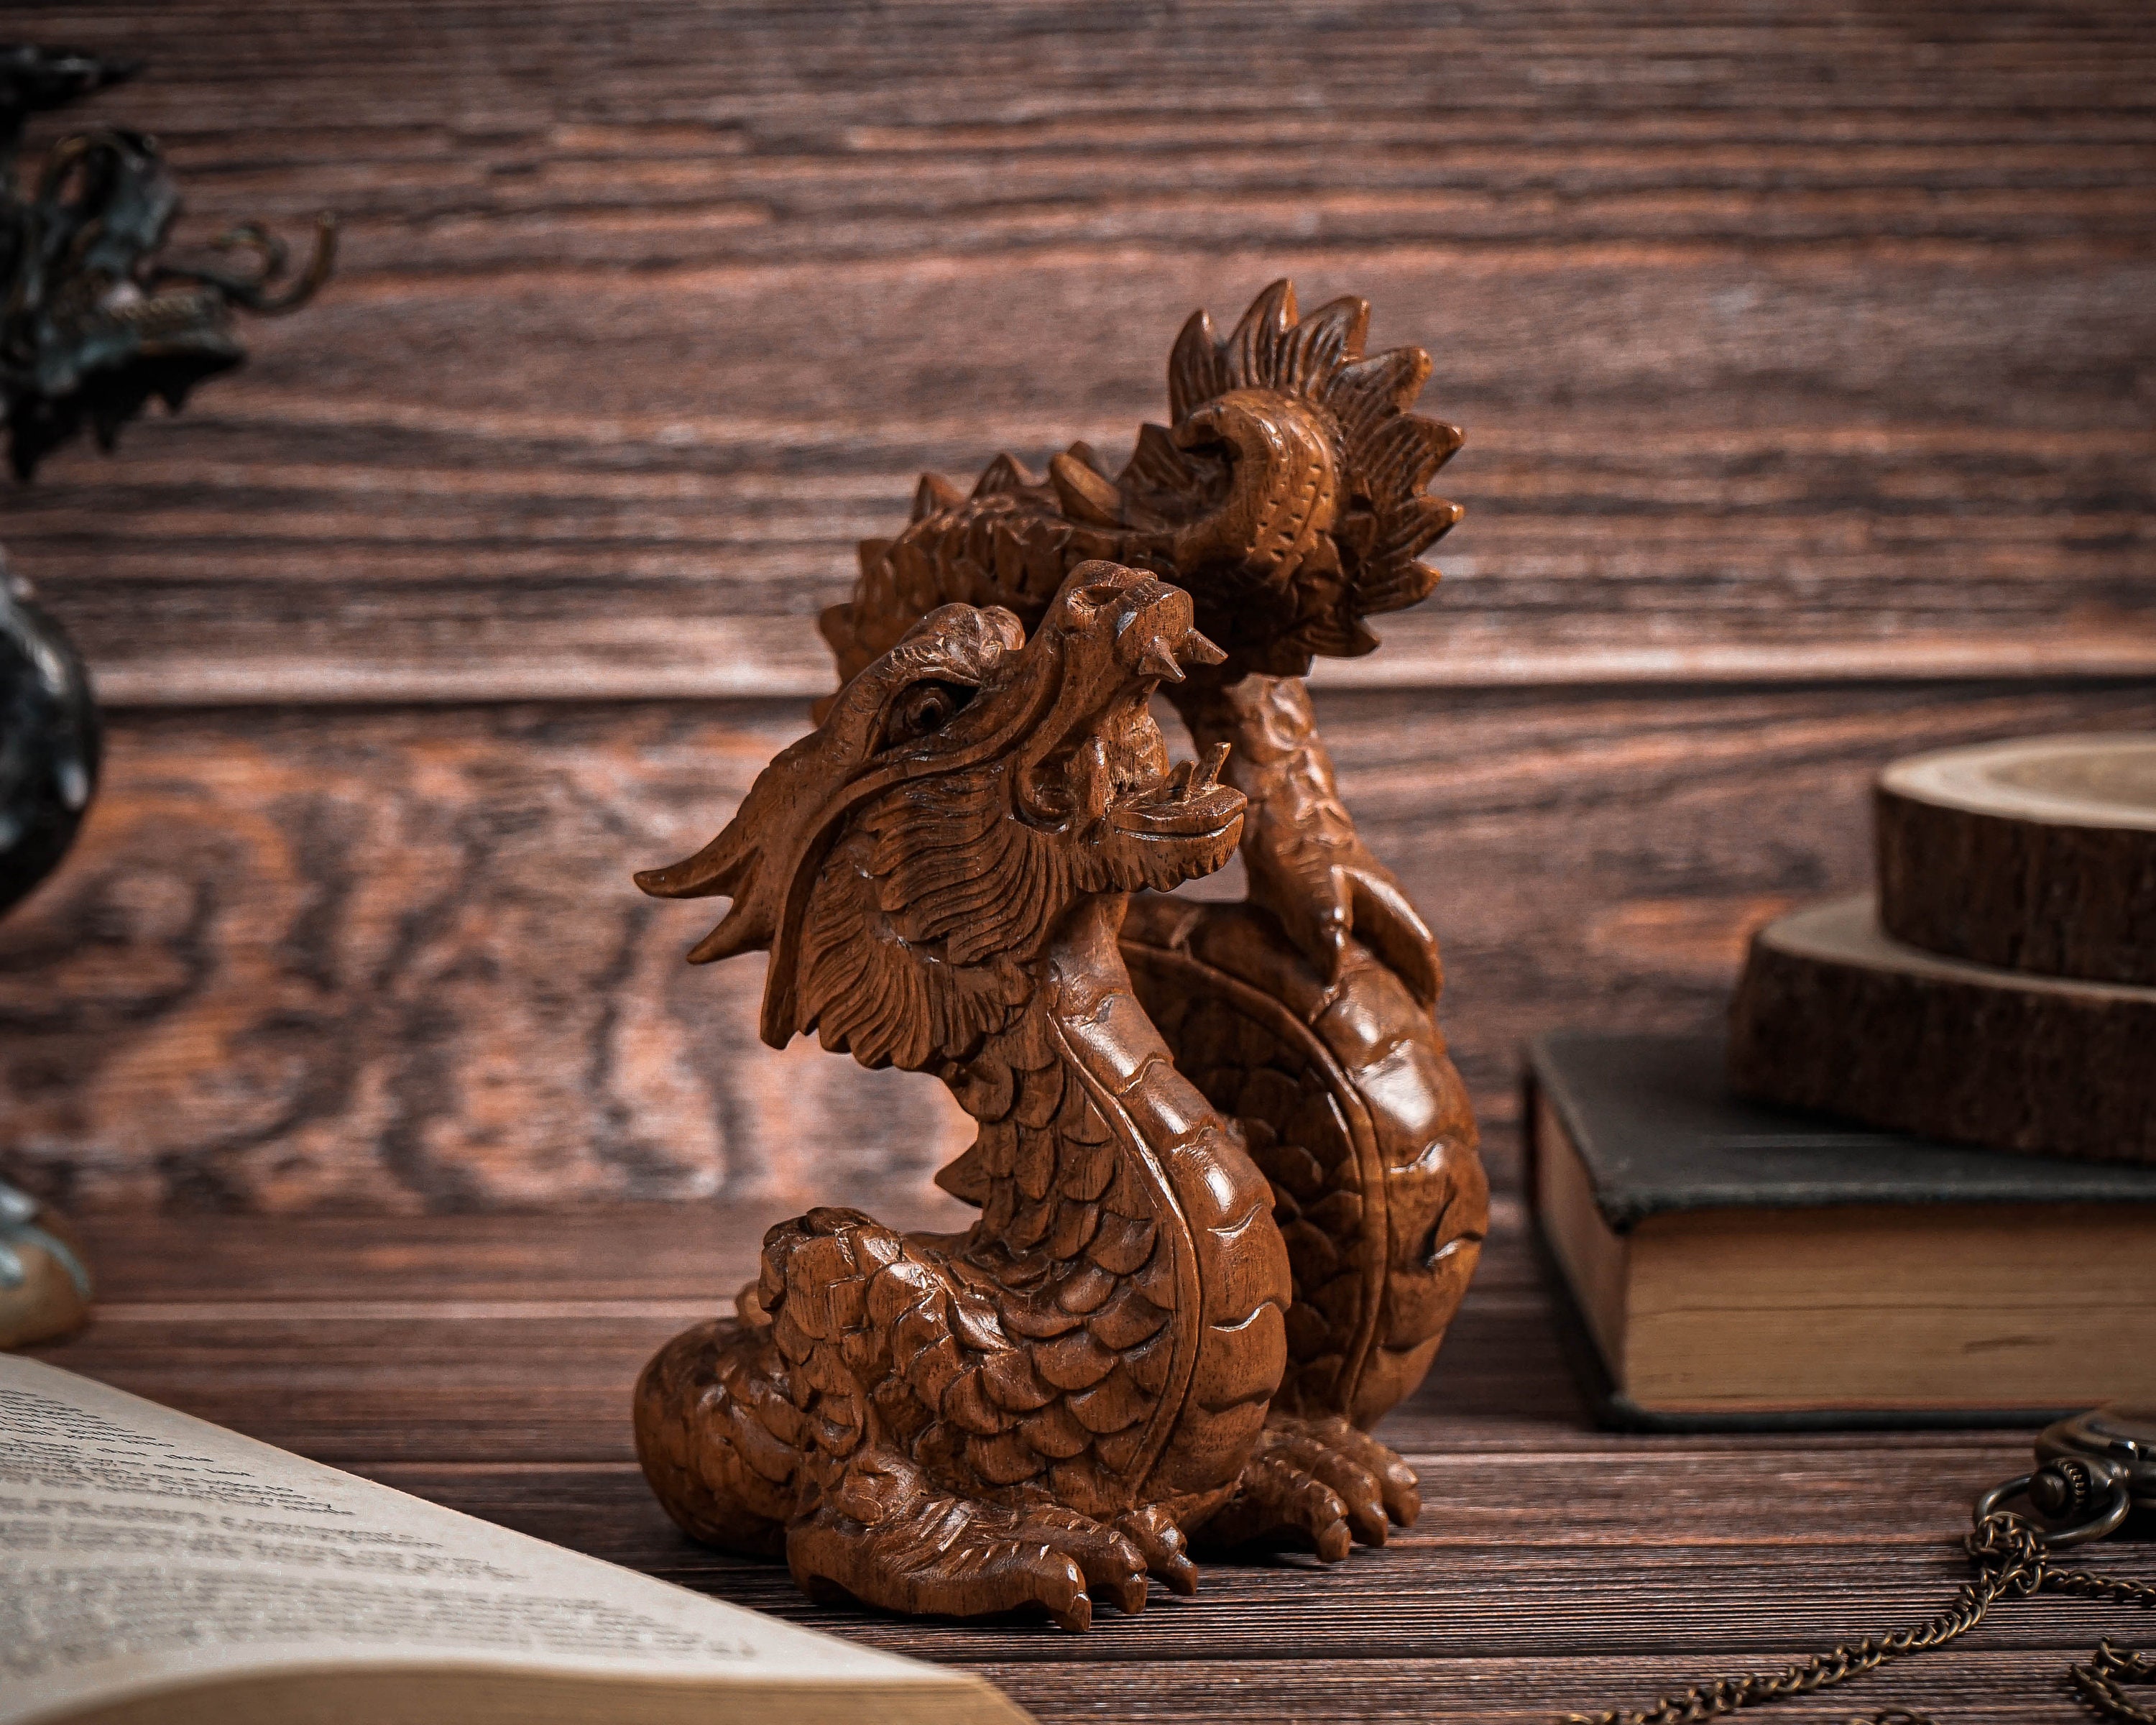 Wooden Dragon Statue 5.9, Unique Sculpture, Chinese Dragon, Mystical Animal,  Unique Statue, Handmade, Art, Gift for Her, Memorial Gift 